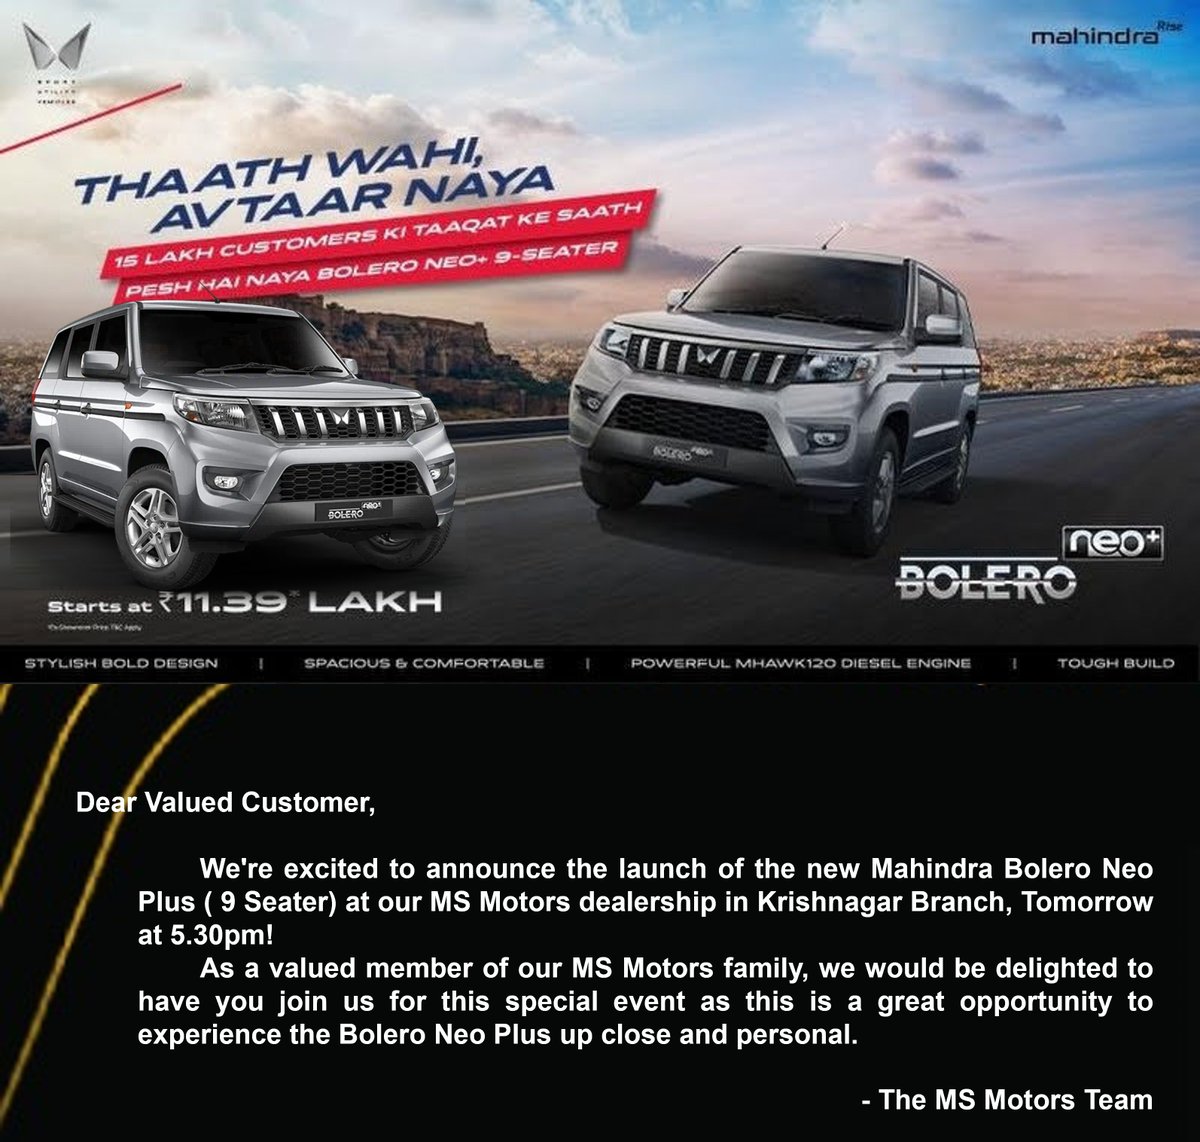 Dear Valued Customer,

We are thrilled to invite you to the launch event of the new Mahindra Bolero Neo Plus at our MS Motors dealership!🎉🚗
 
This special event will be held tomorrow at 5:30 PM at our Krishnanagar branch. 

#MSMotors #Mahindra #BoleroNeoPlus #LaunchEvent